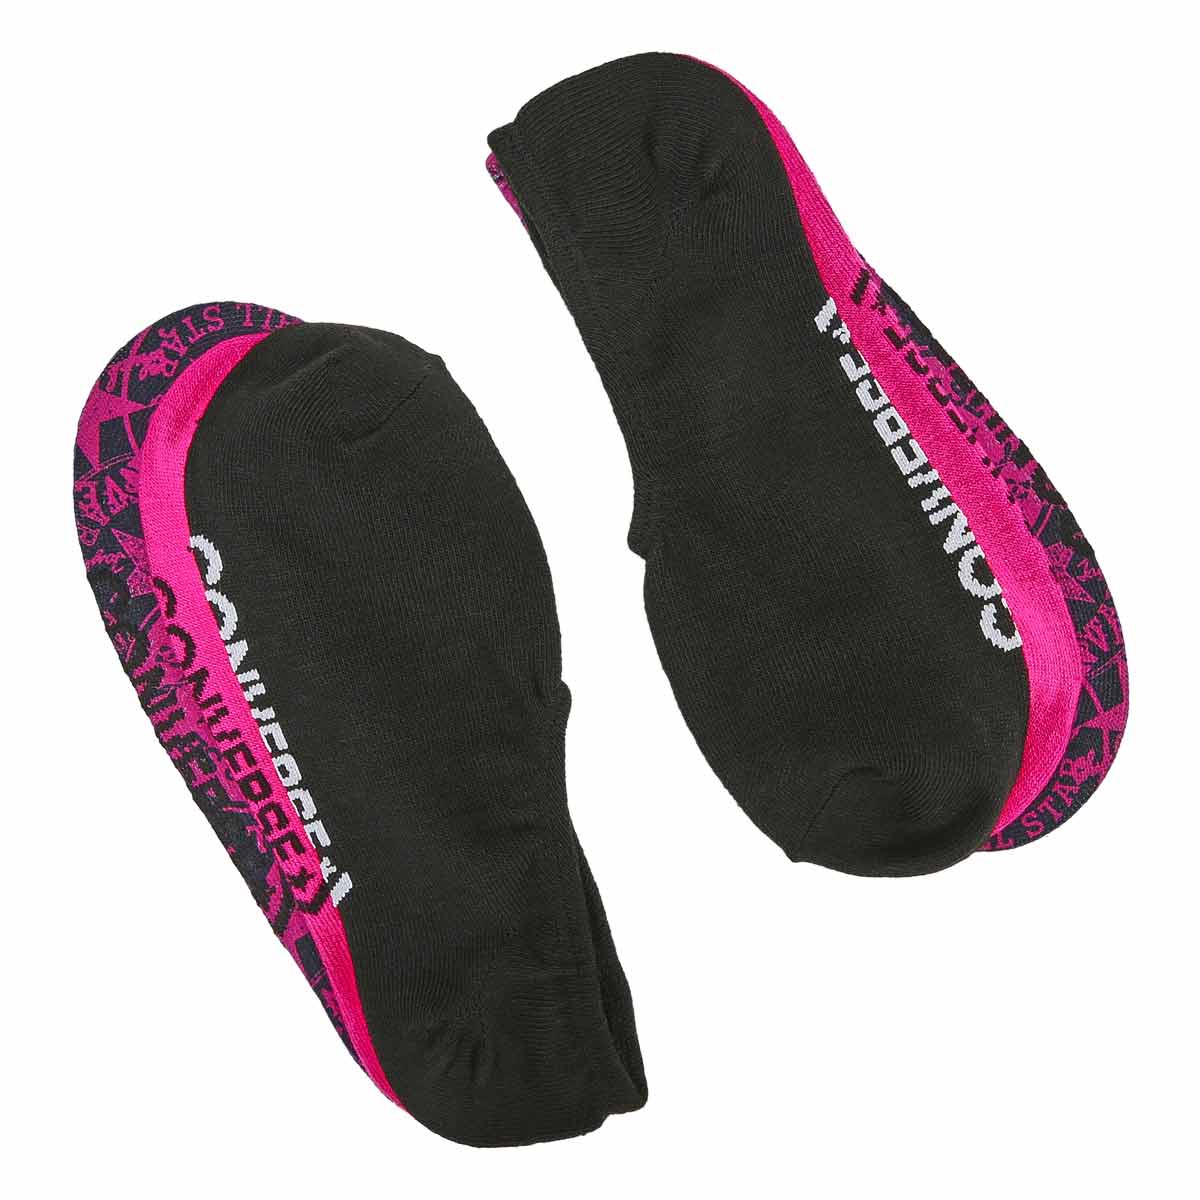 Socquettes invisibles MFC OX, femme - 3 paires